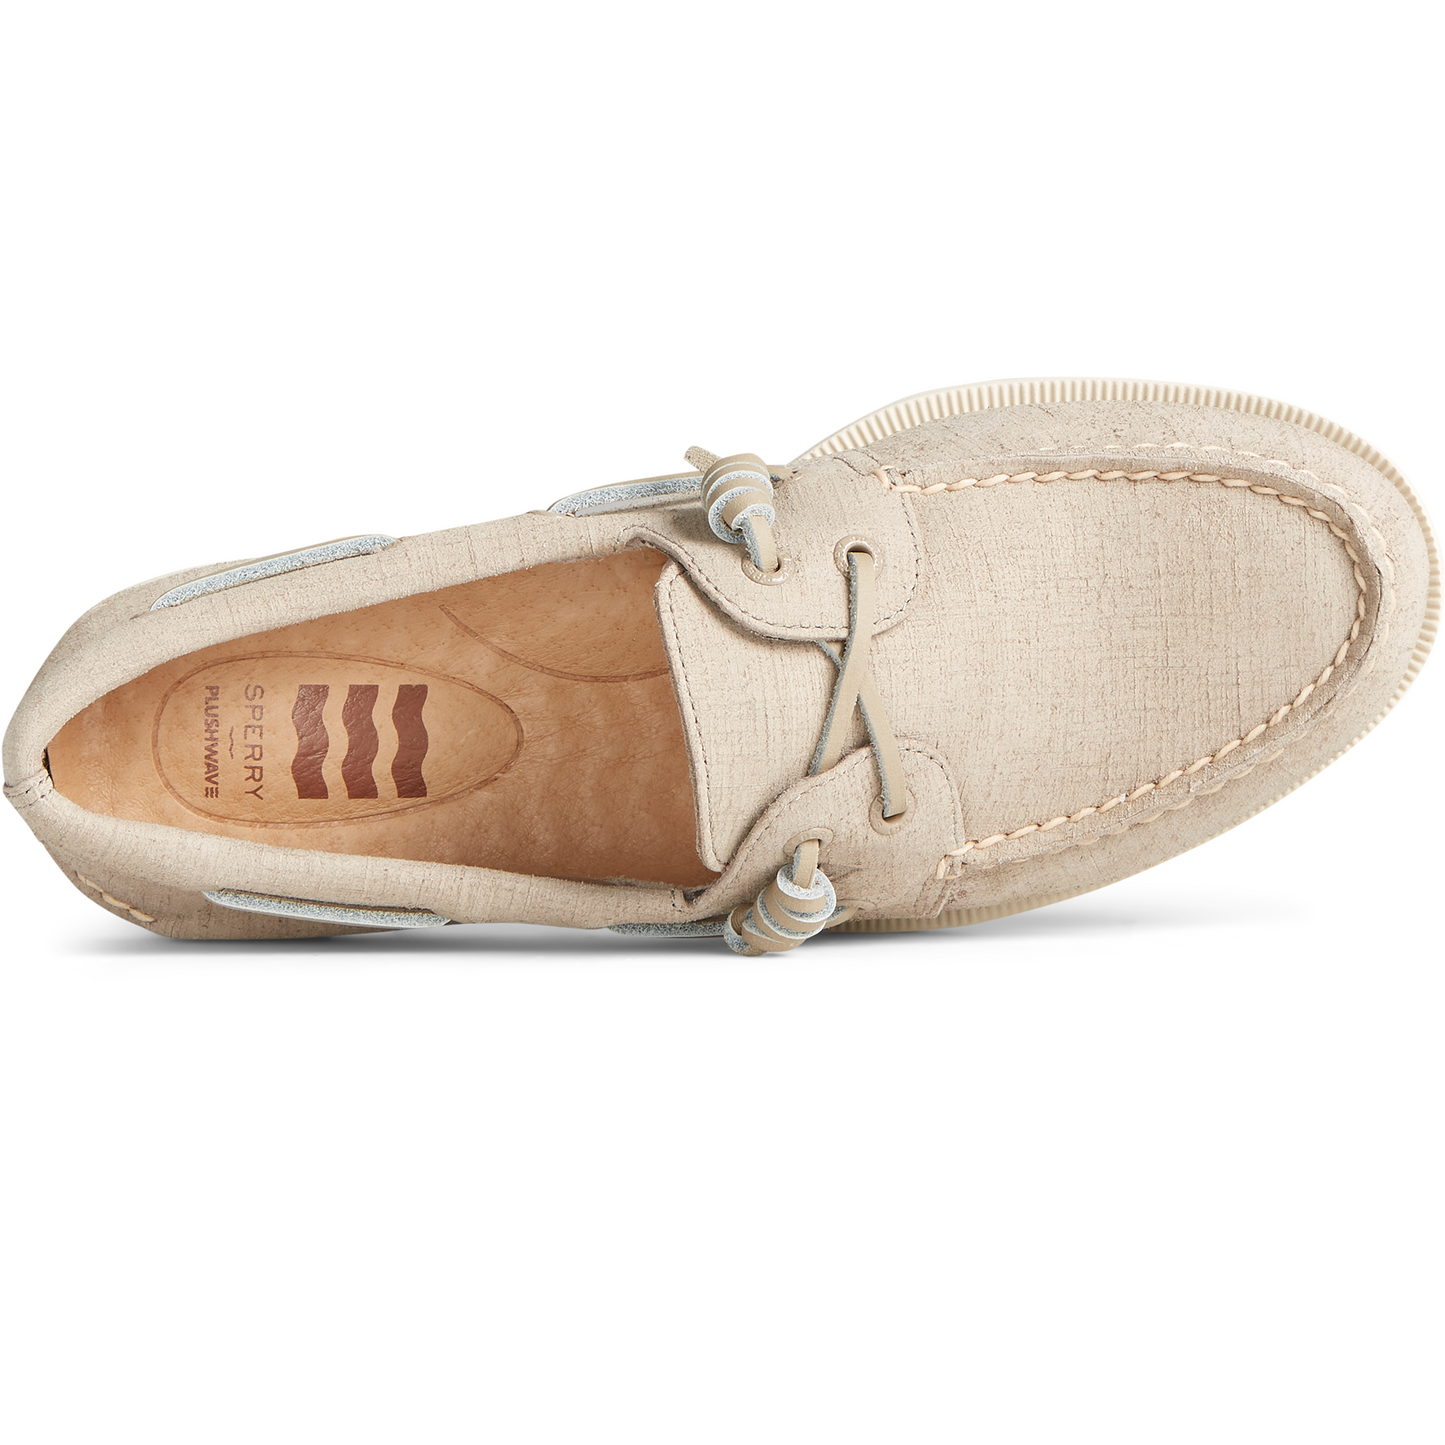 Sperry Women's Authentic Original PLUSHWAVE Checkmate Boat Shoe - Taupe (STS86658)